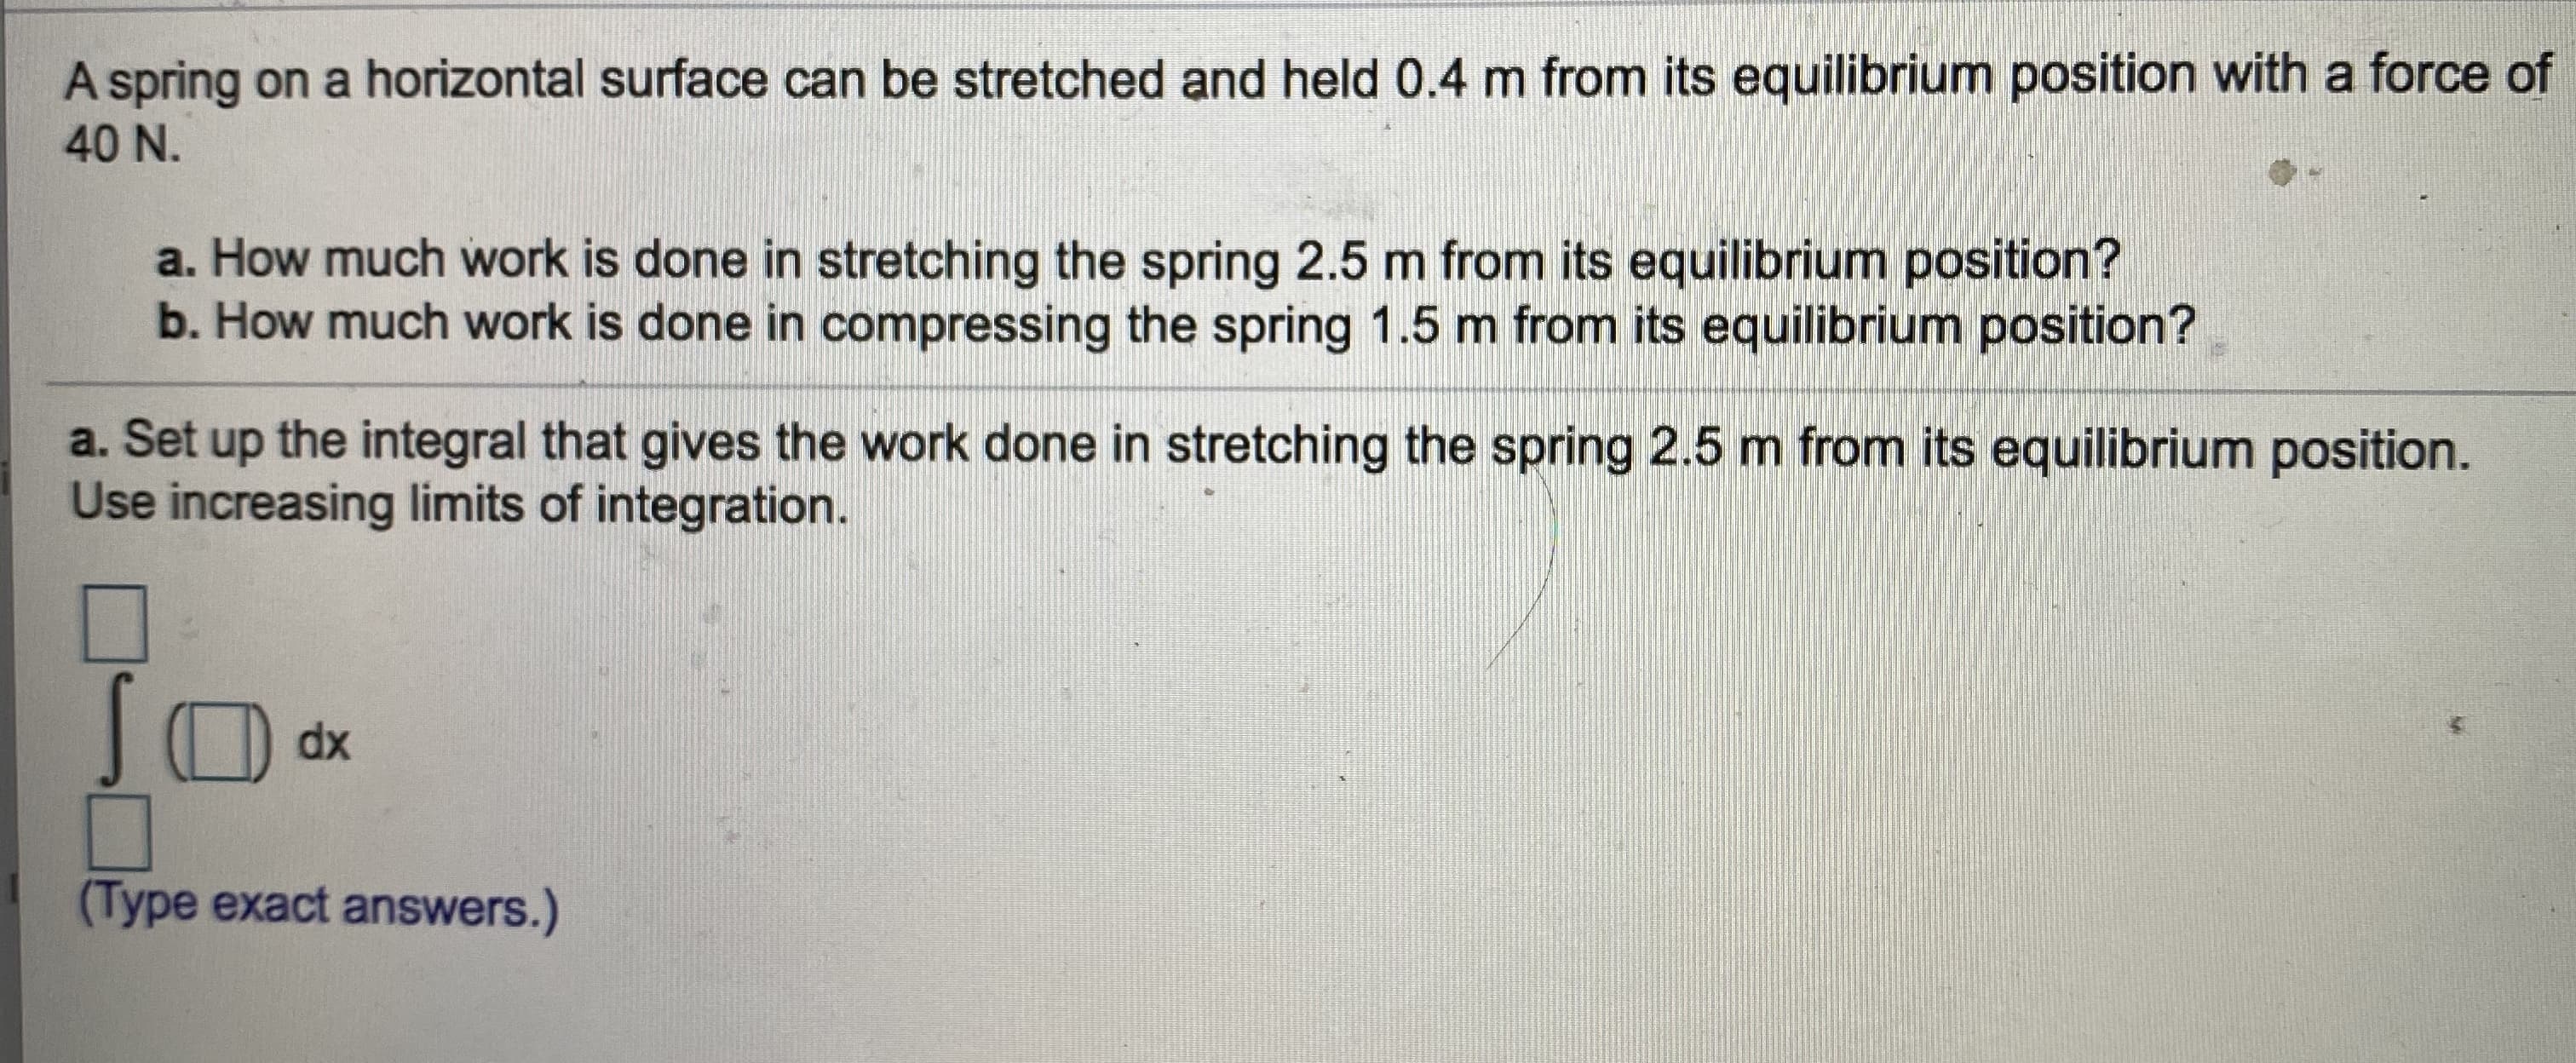 A spring on a horizontal surface can be stretched and held 0.4 m from its equilibrium position with a force of
40 N.
